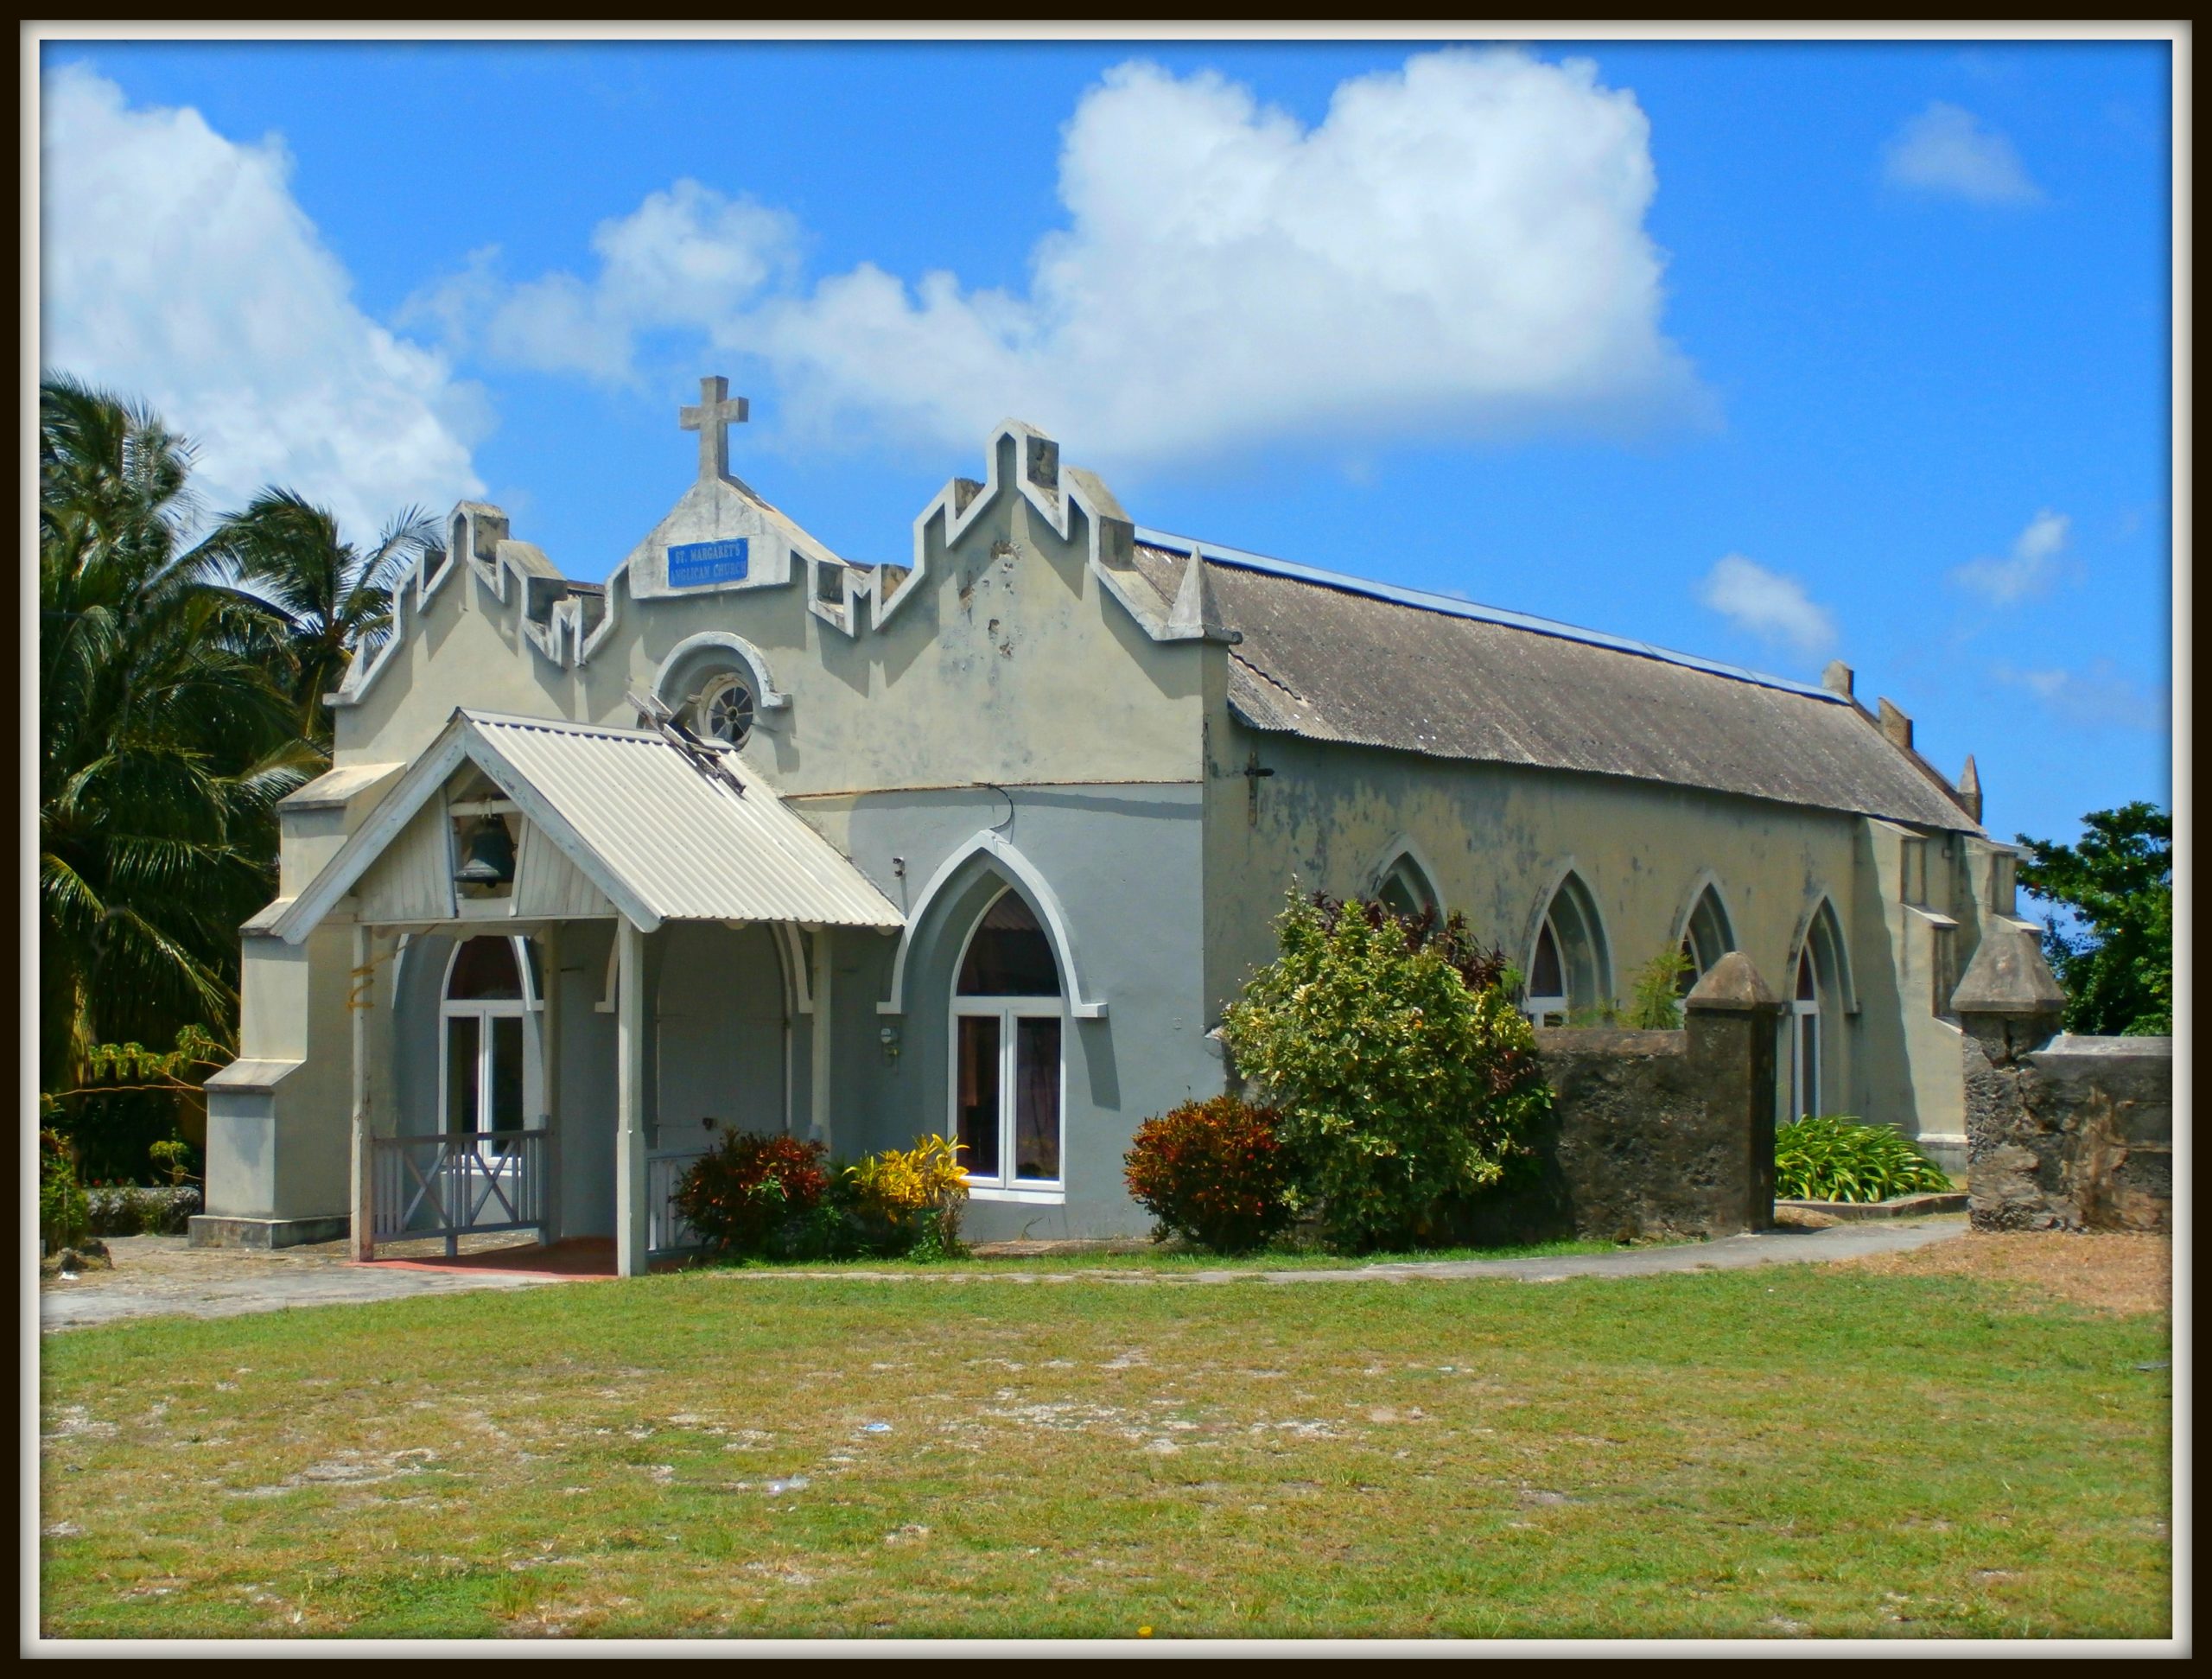 St. Margaret's Anglican Church